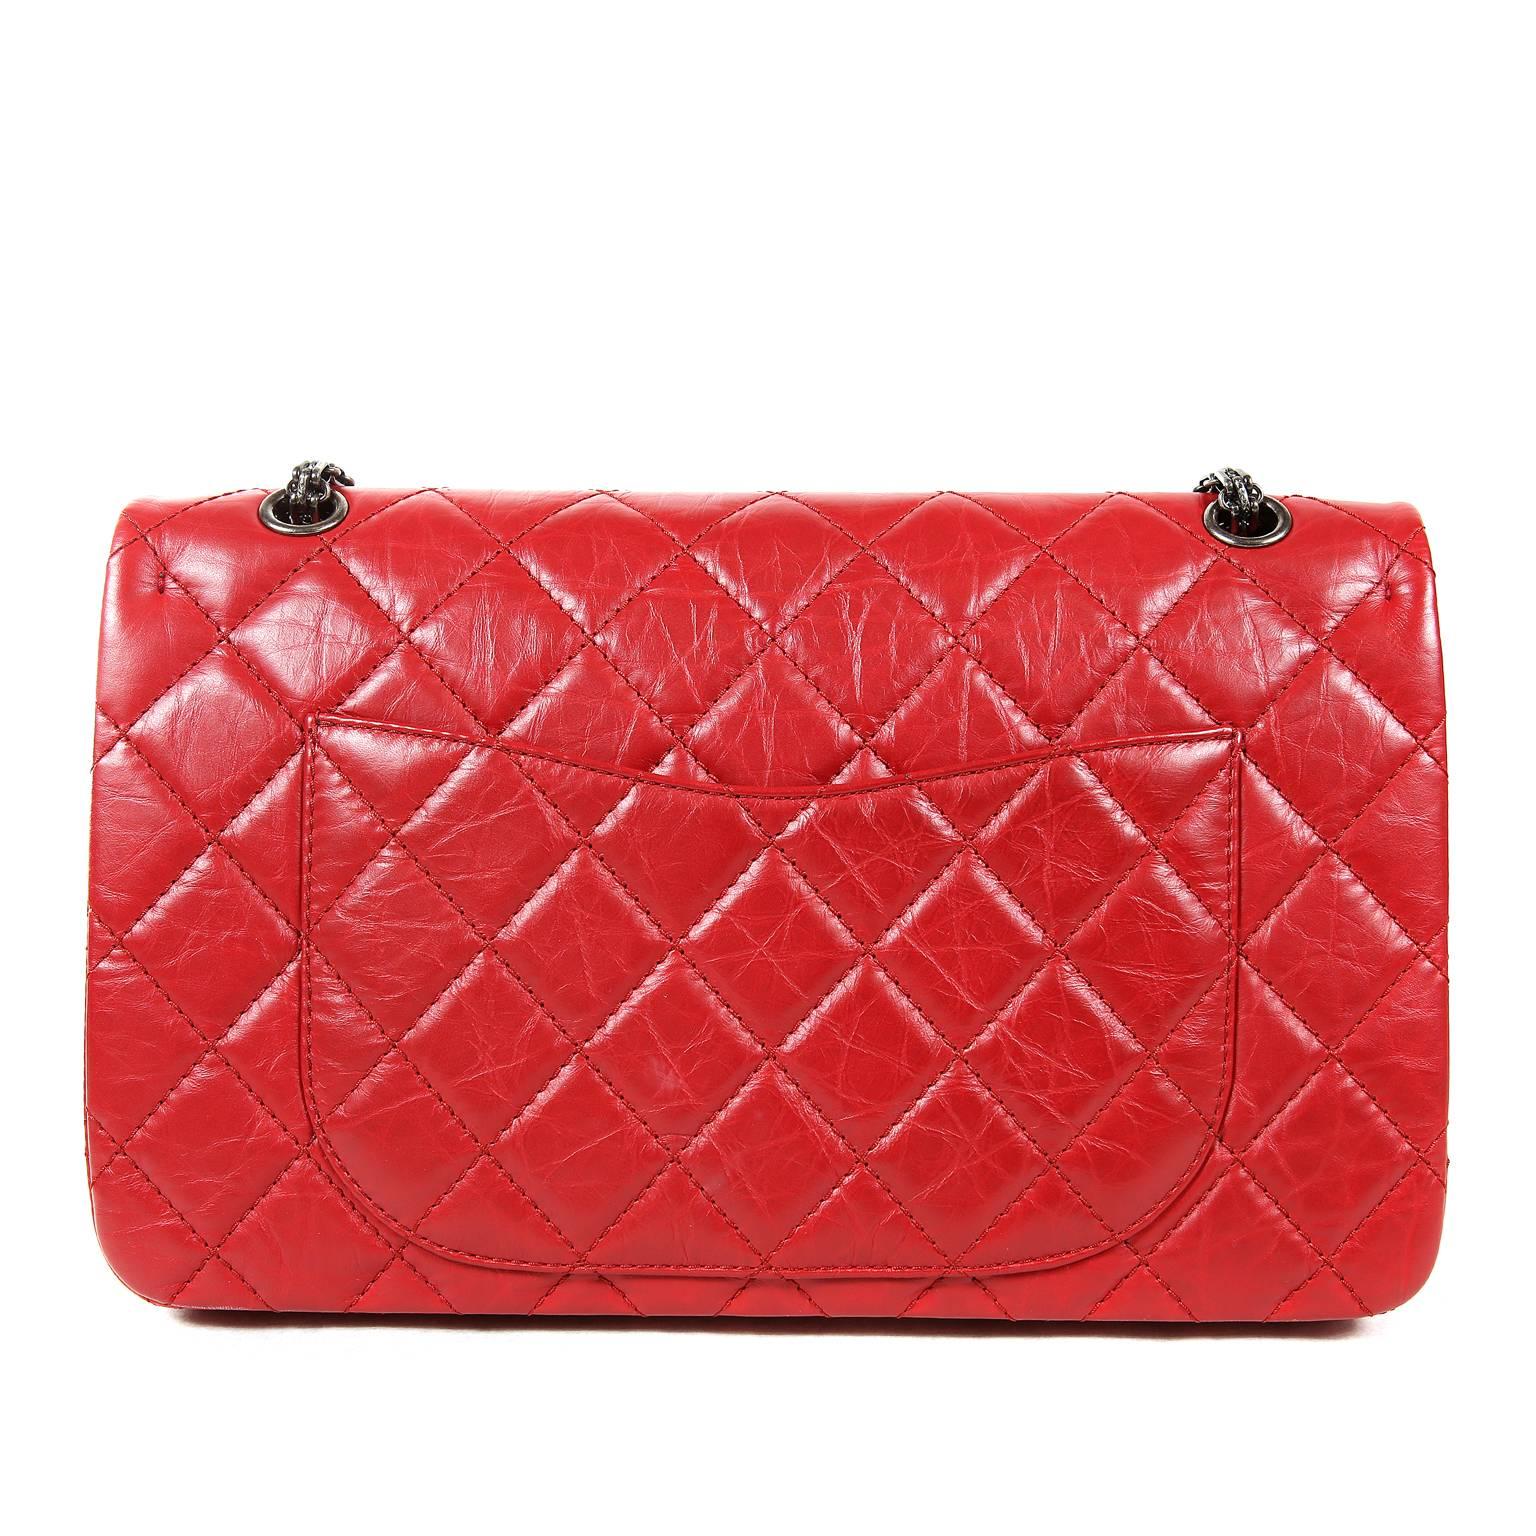 Chanel Red Calfskin 2.55 Reissue Flap Bag- PRISTINE
The particular shade of lipstick red aged calfskin paired with edgy ruthenium hardware makes this collectible Chanel a real head turner.  Largest size available, the 227.
Cherry red aged calfskin